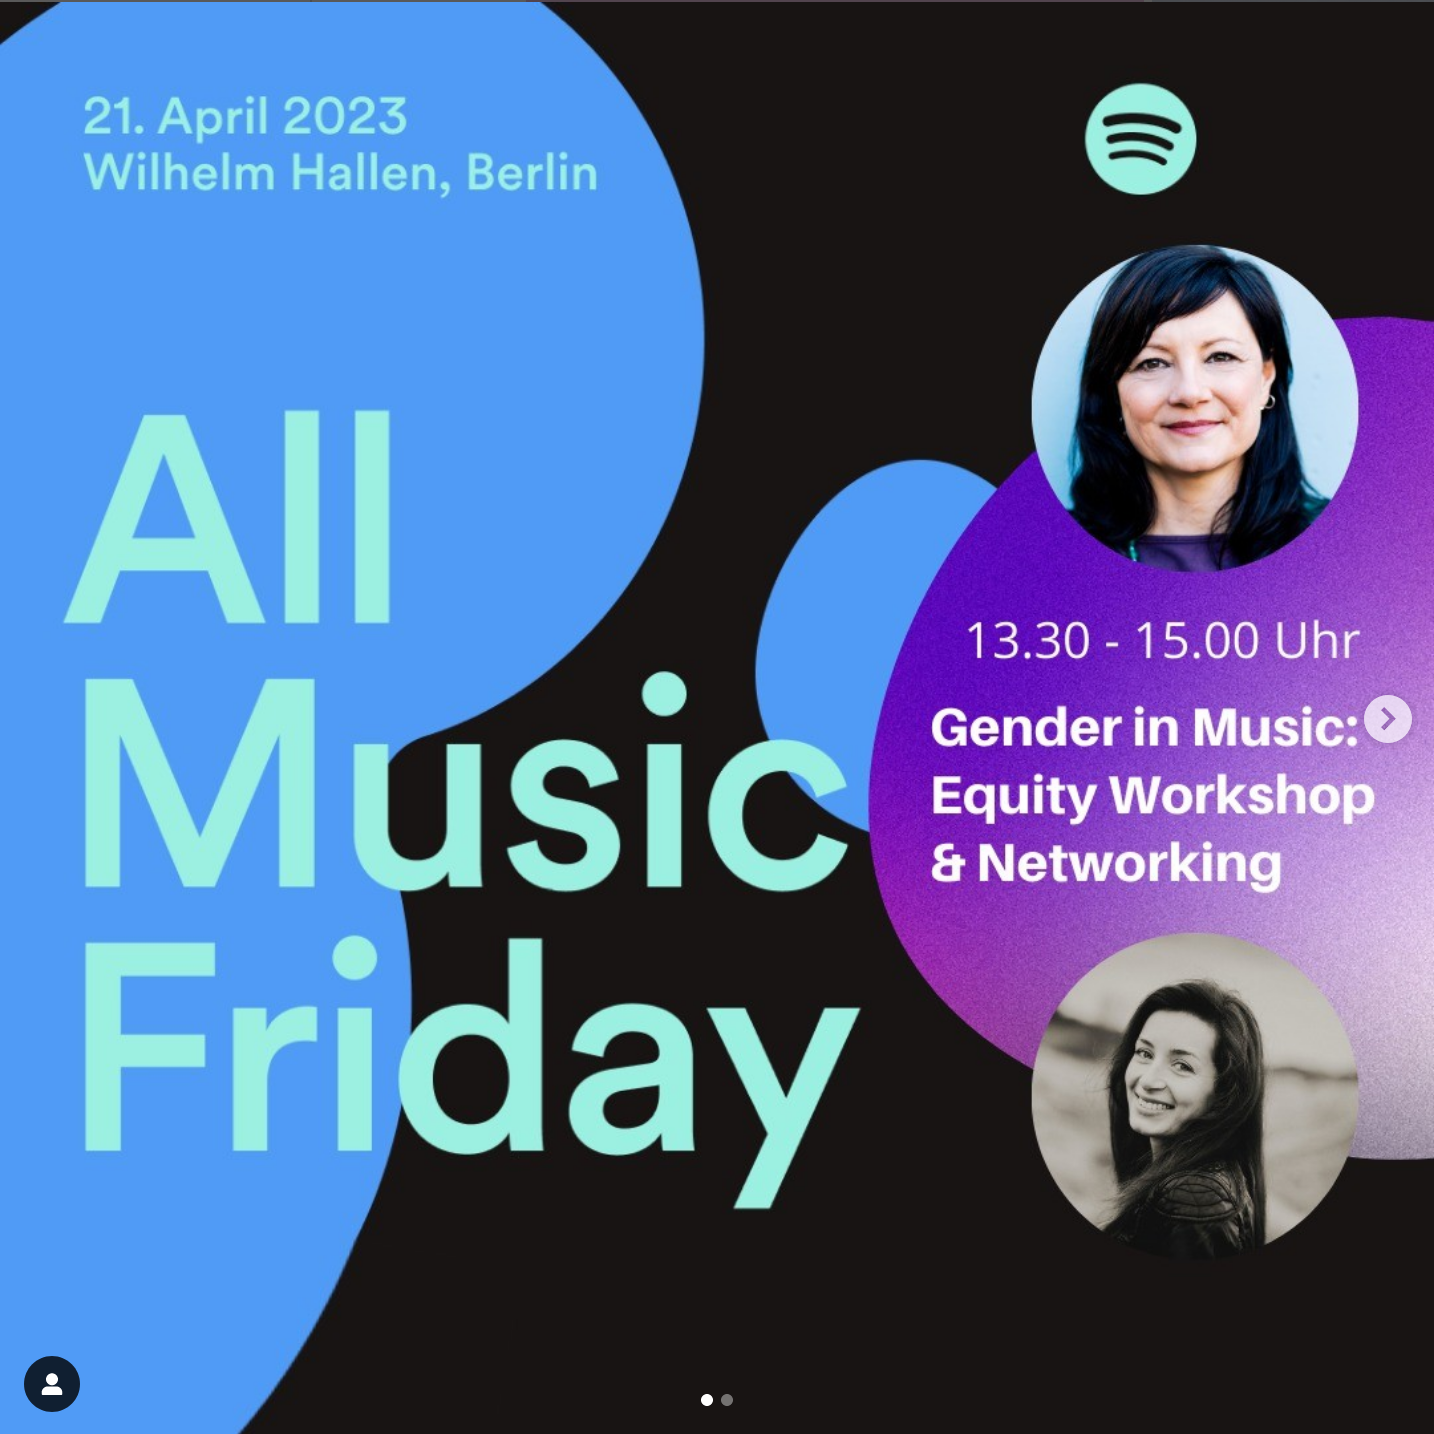 All Music Friday | Gender in Music: Equity Workshop & Networking | 21.04.2023 | Berlin